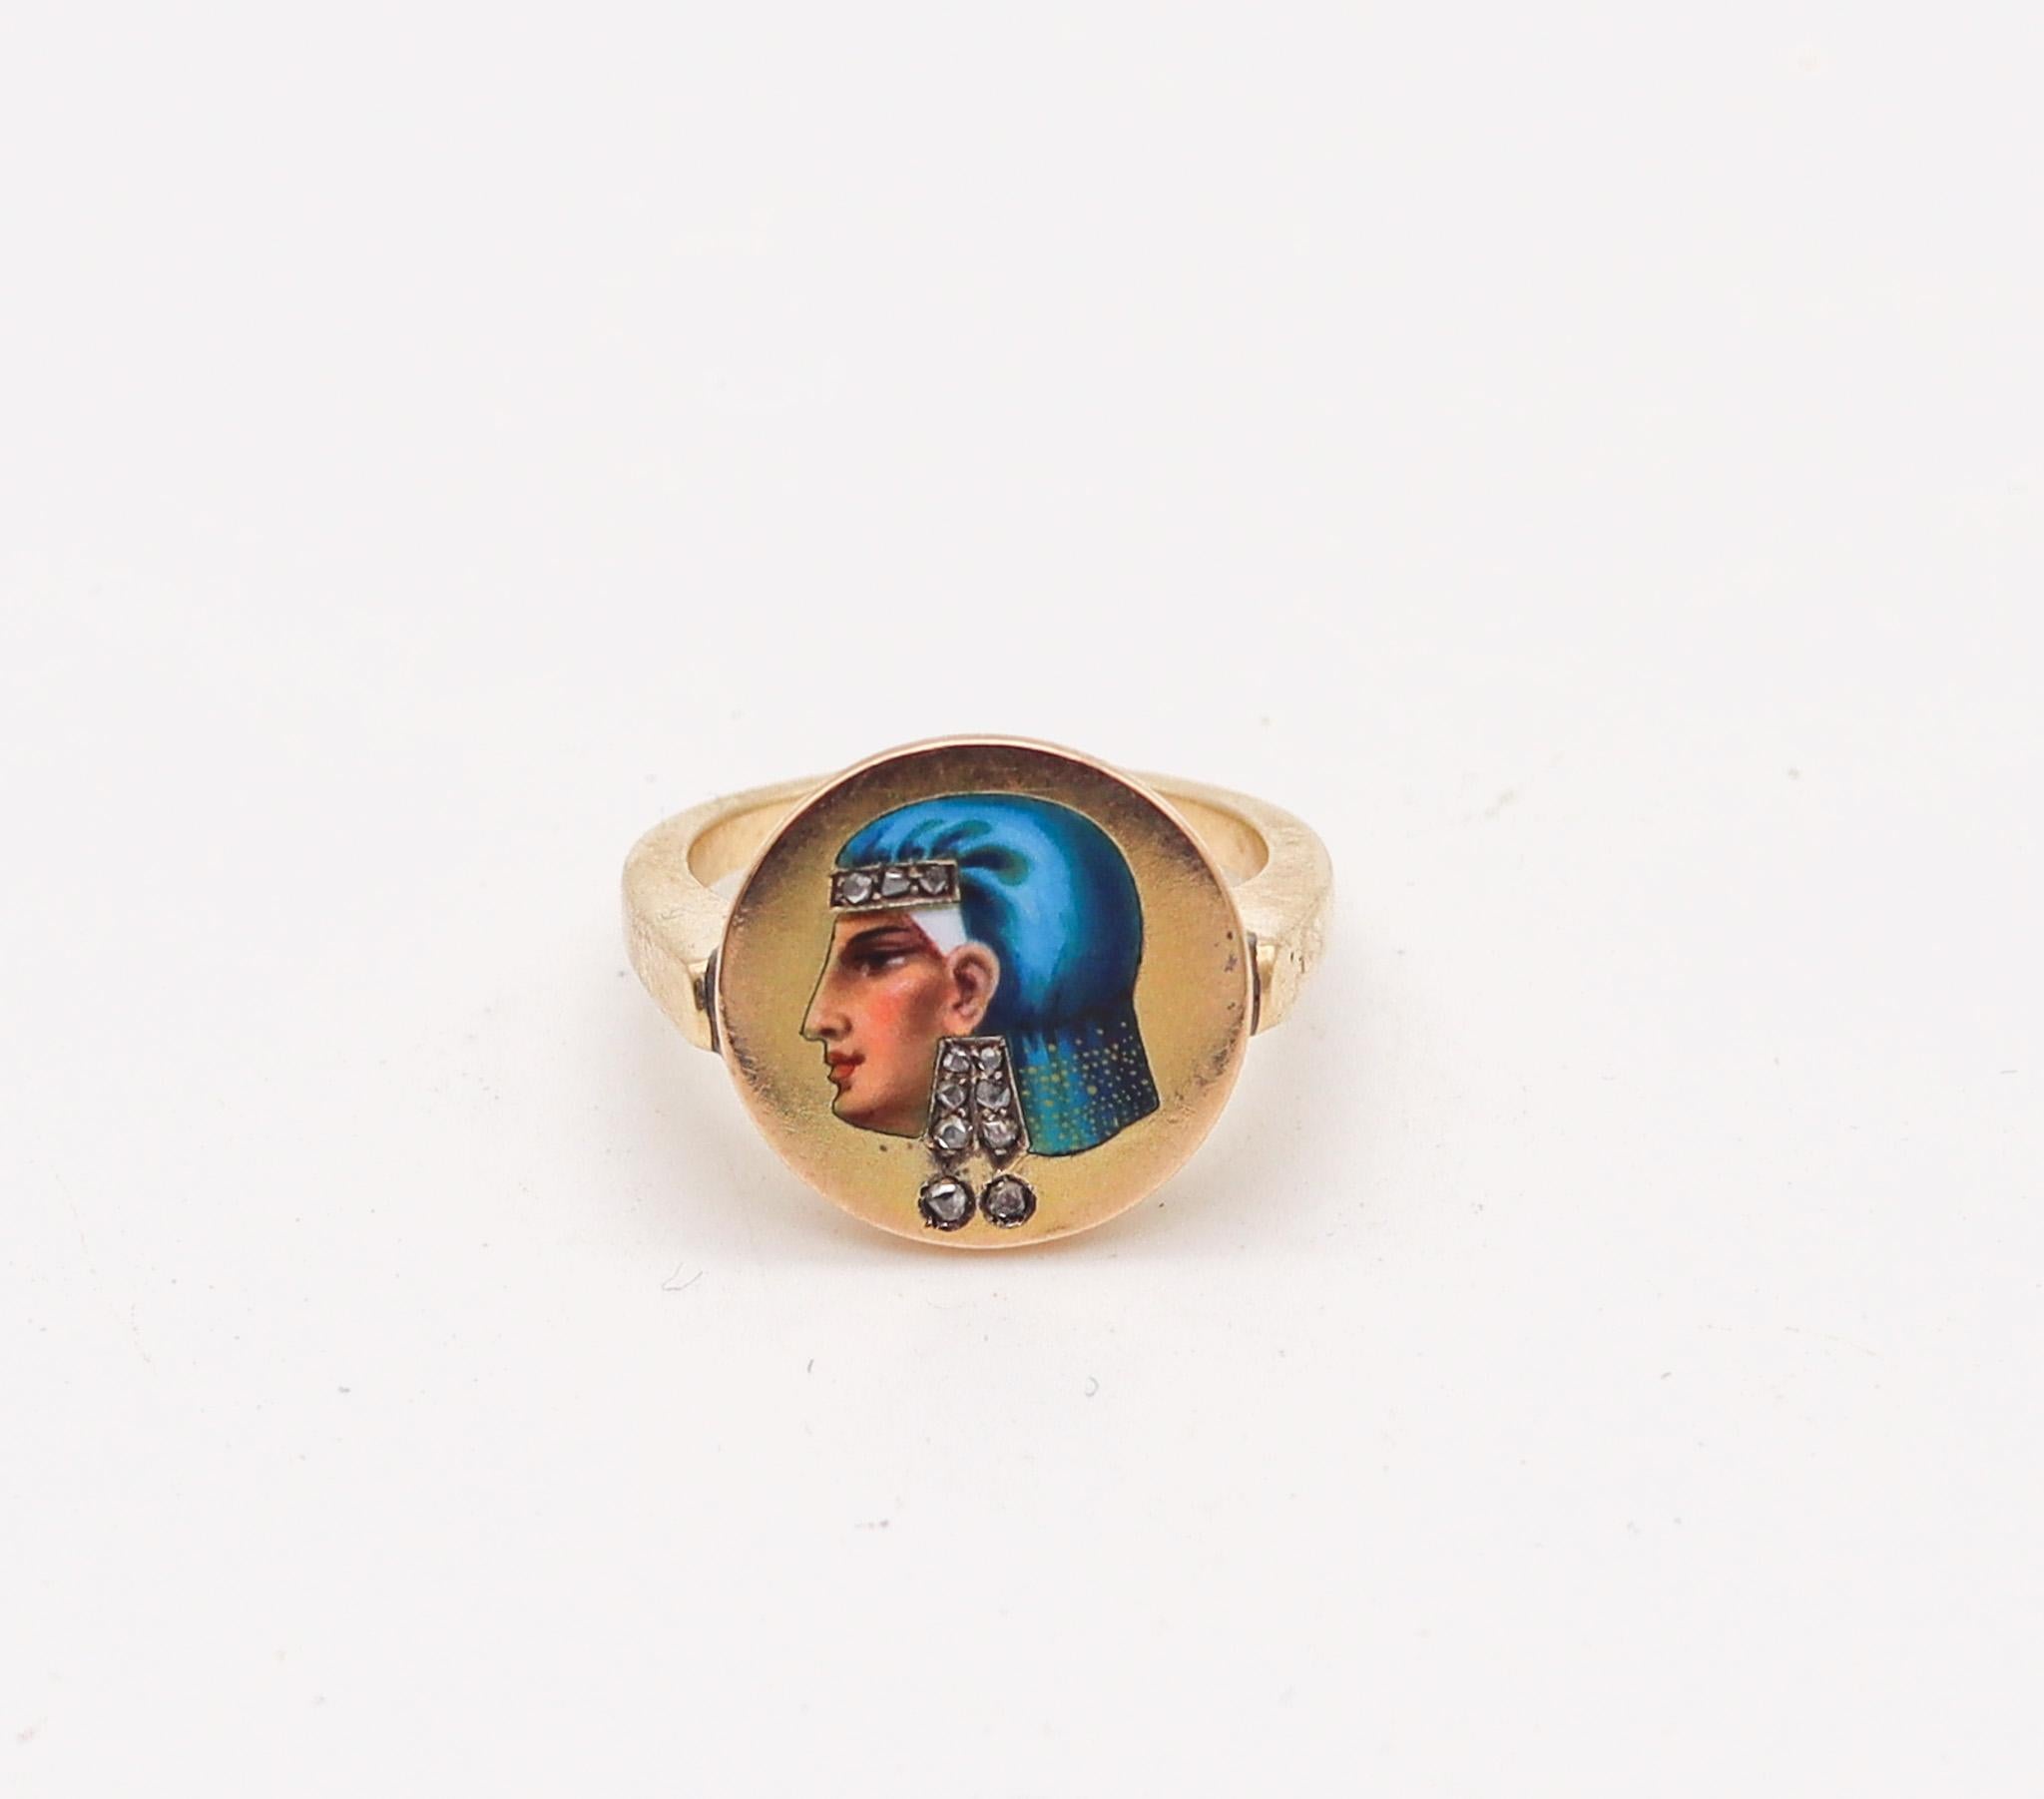 An Egyptian revival ring.

Magnificent antique 19th century ring, created in Europe in the Egyptian revival style, back in the 1860's. The outstanding ring has been crafted with classic patterns in solid yellow gold of 14 karats with high polished